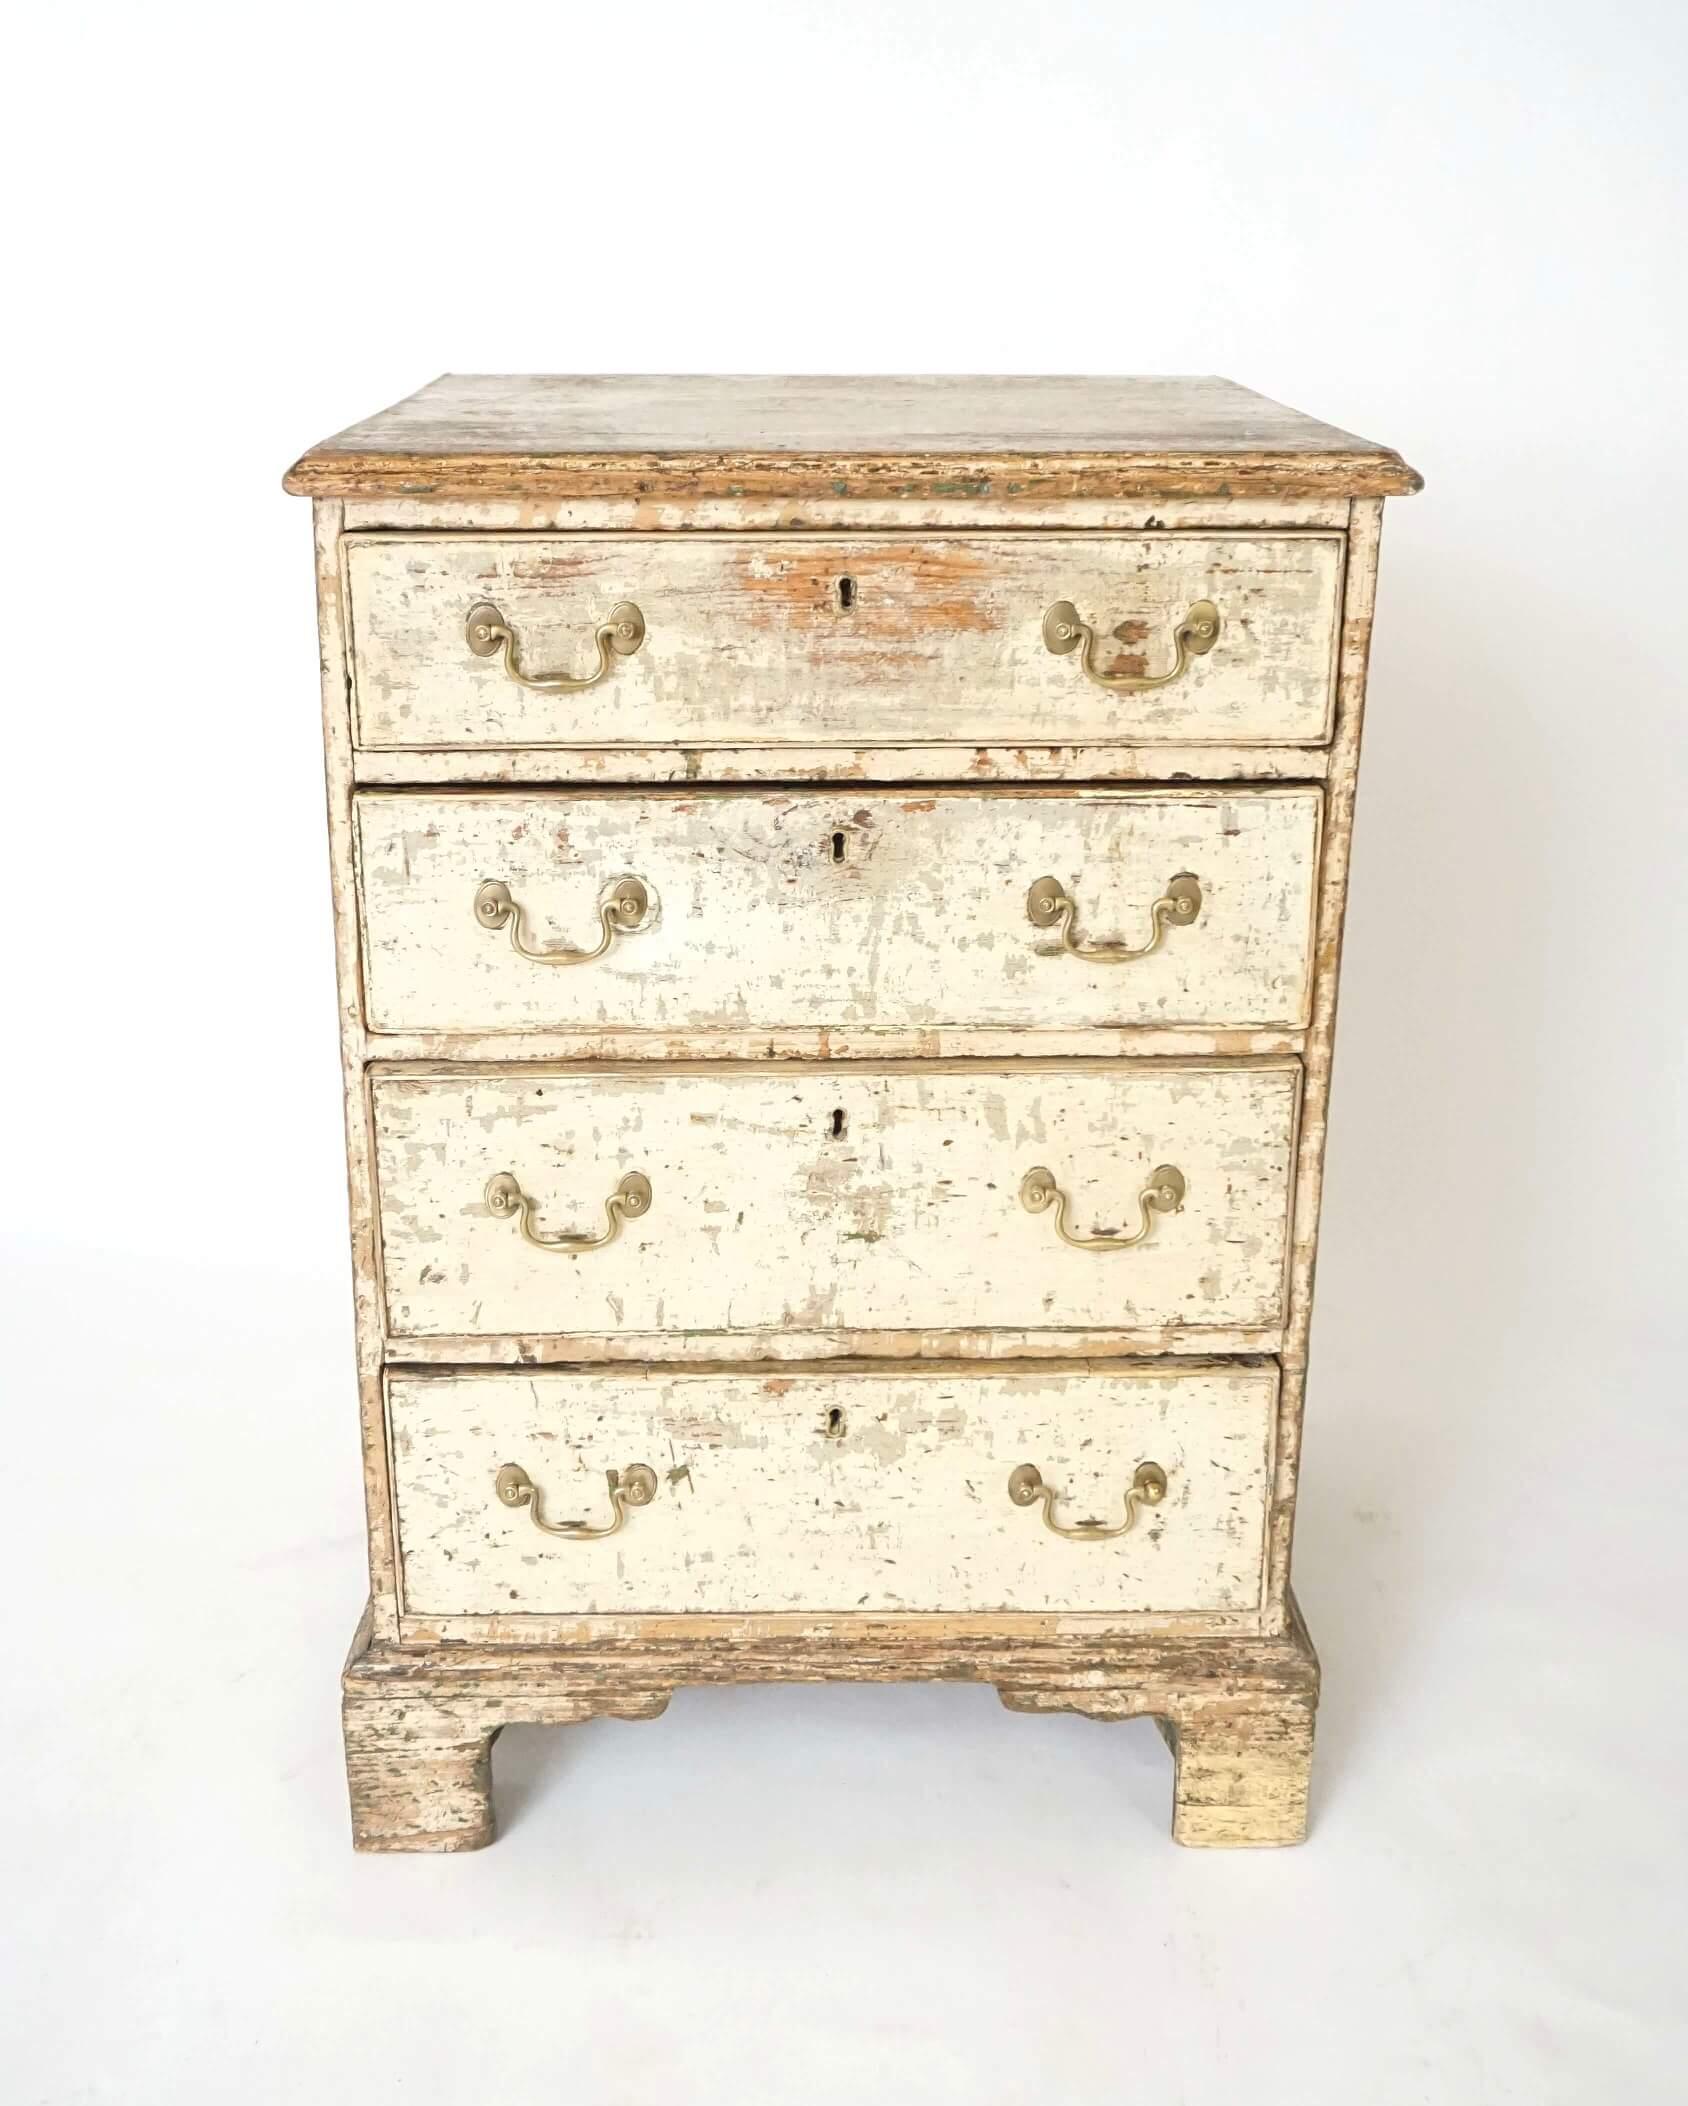 Wonderful, rare circa 1780 English George III painted chest of unusual 'tall' and 'deep' form, the pine case and four graduated drawers in 'historic' paint layers and original hardware configuration on bracket-foot base. This piece is very